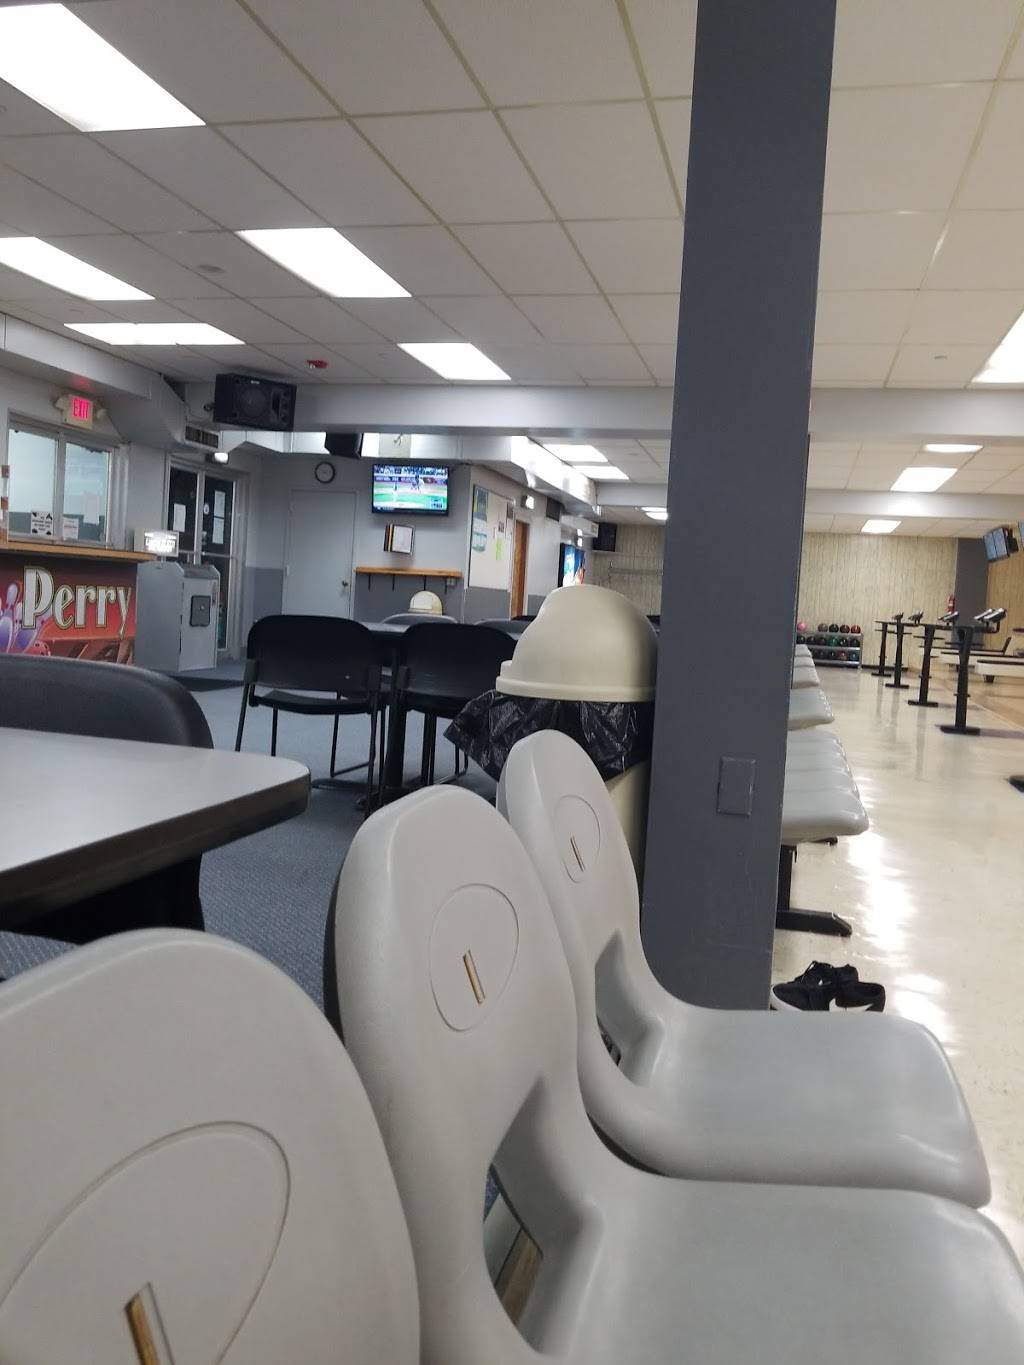 Perry Park Lanes | 9600 Perry Hwy, Pittsburgh, PA 15237 | Phone: (412) 366-4800